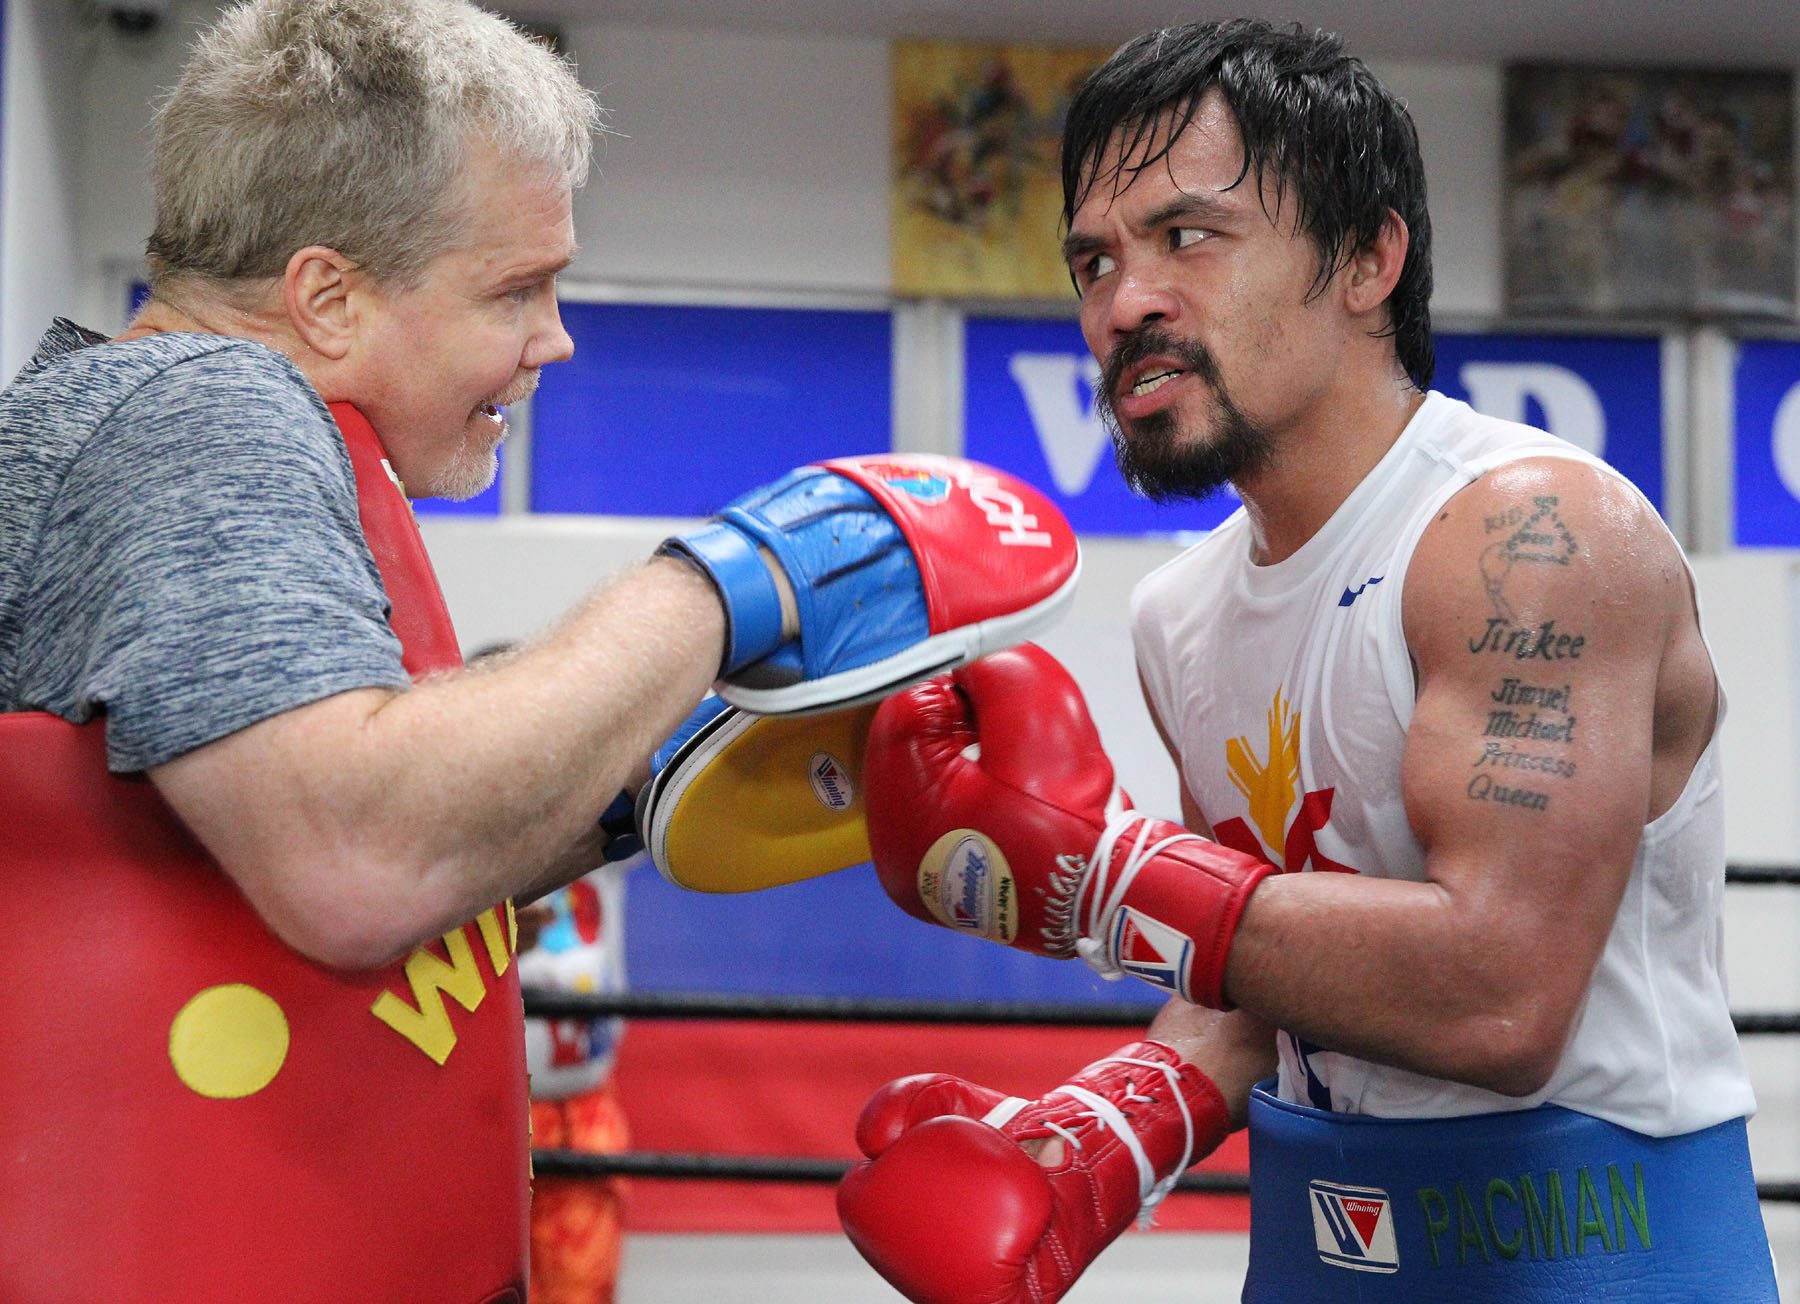 Trainer Roach ‘hurt’ by Pacquiao snub after split